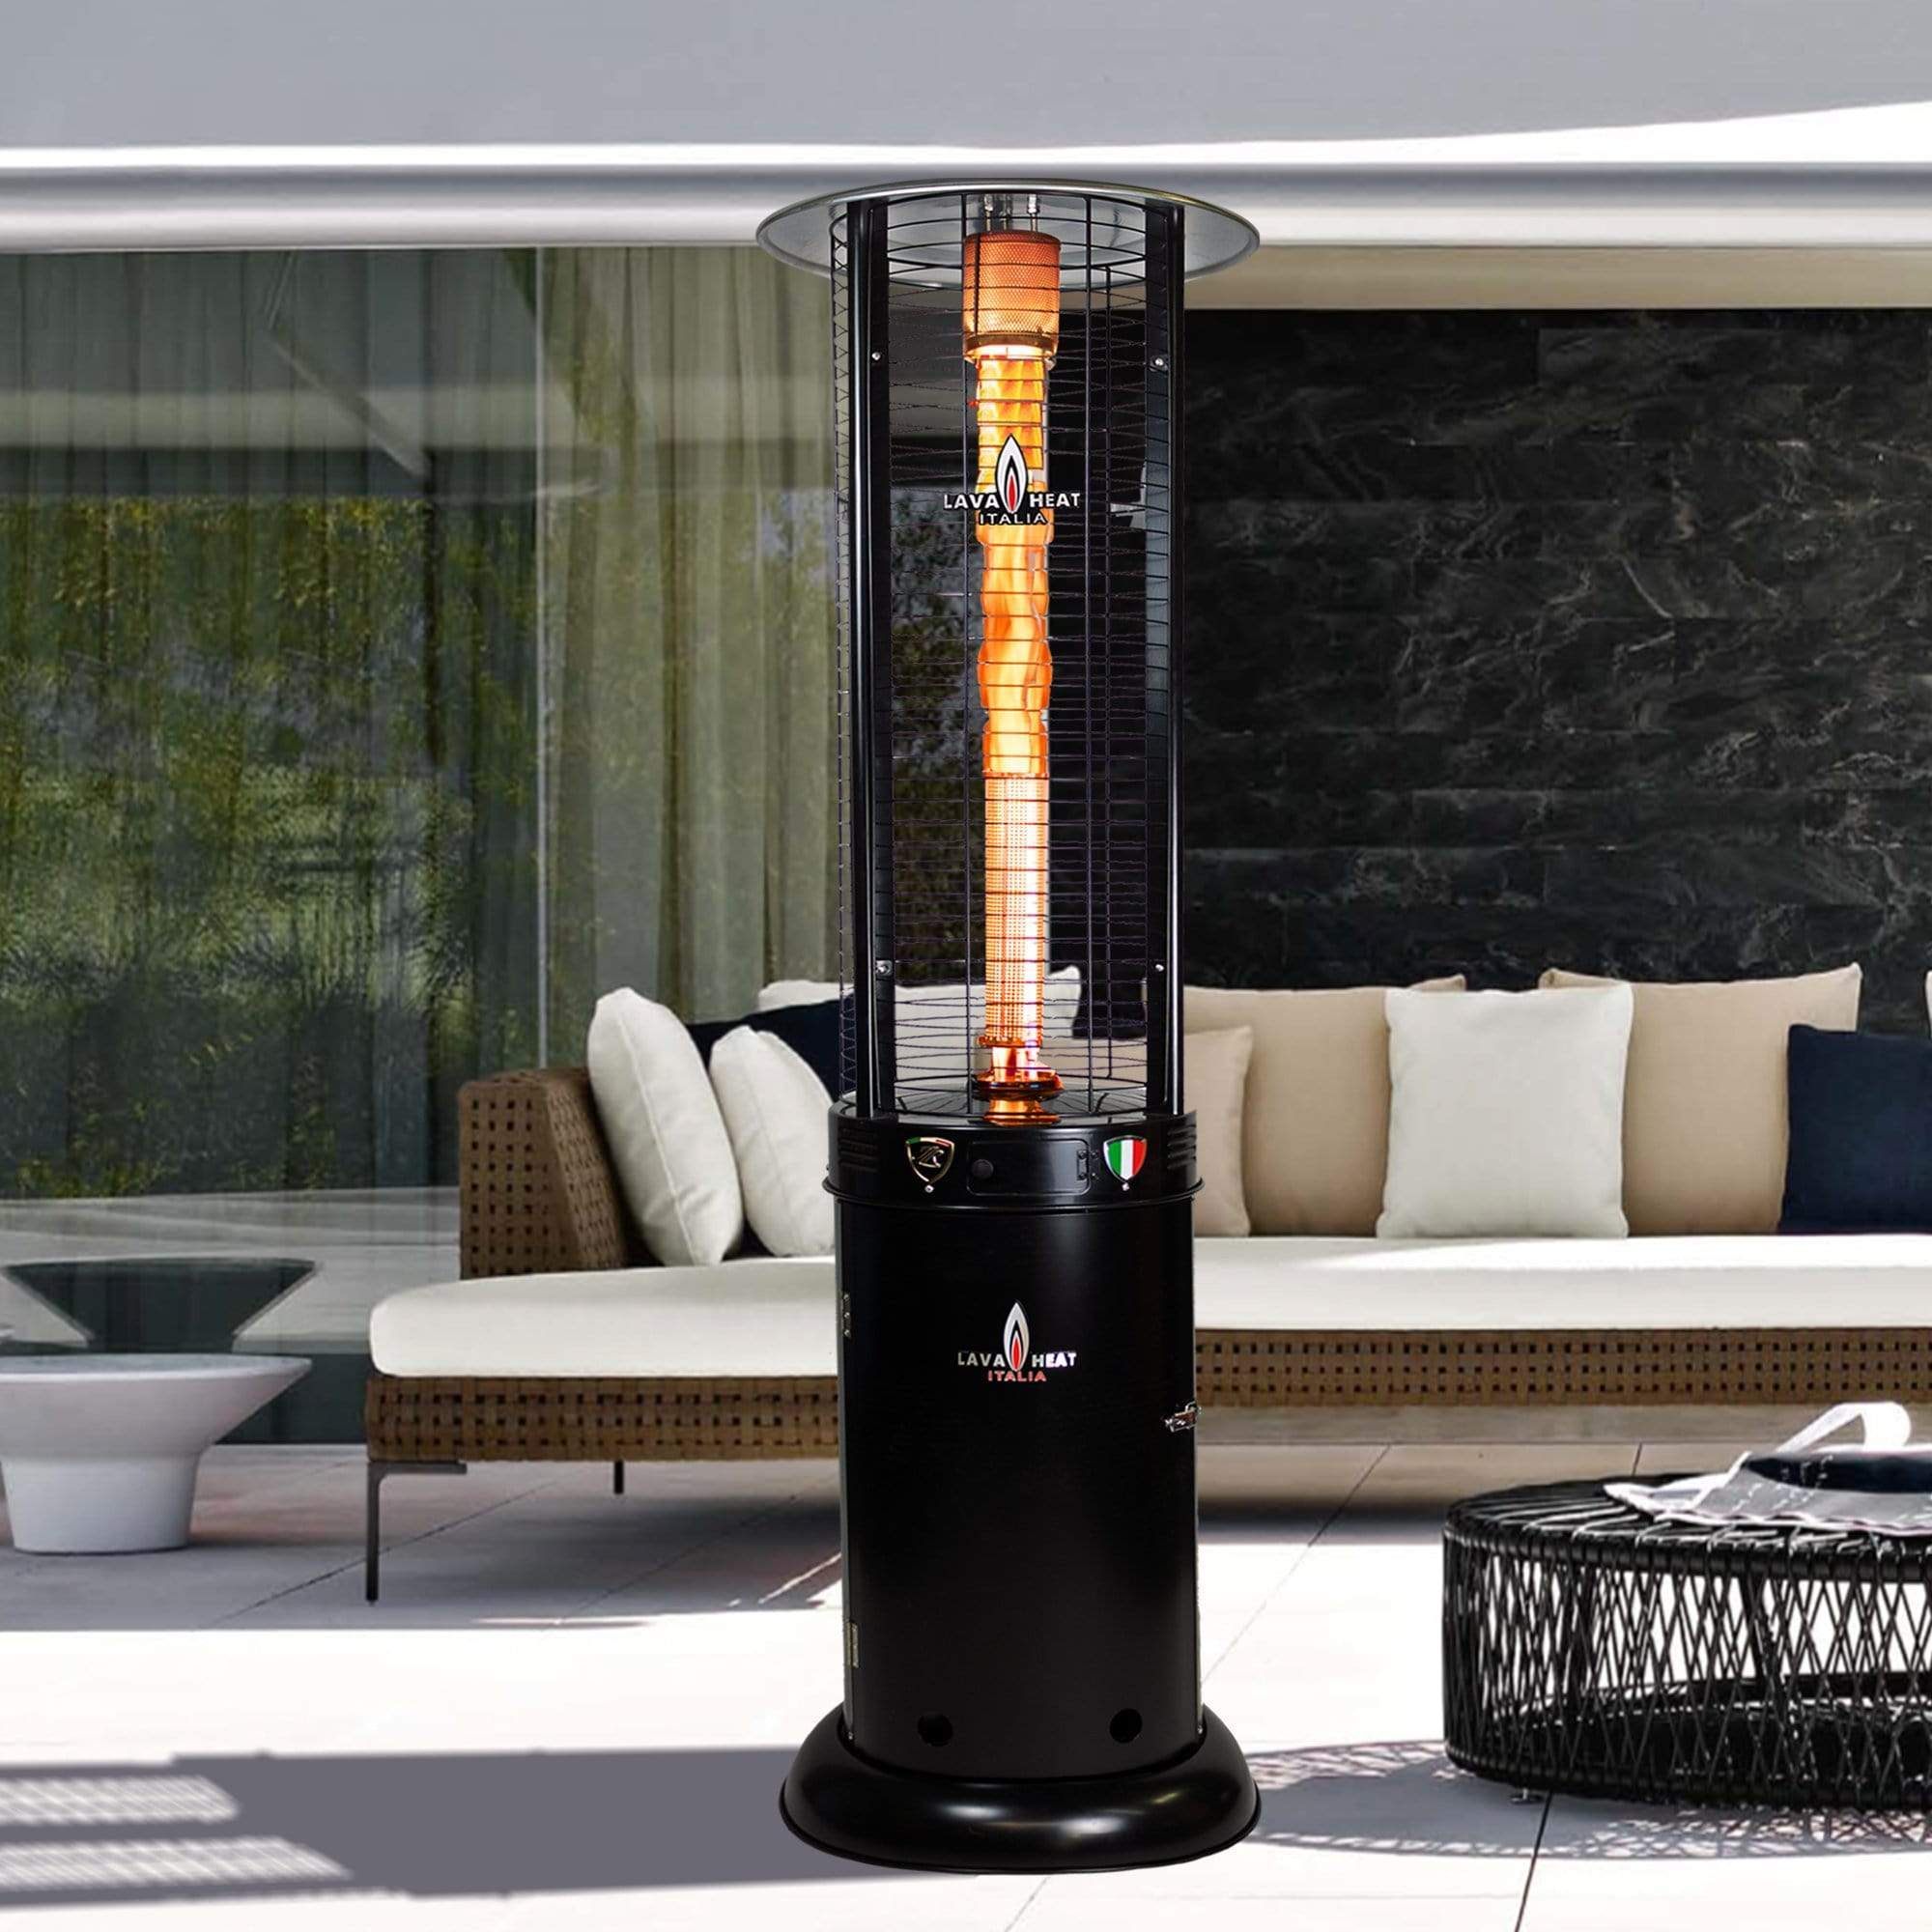 Lava Heat Italia Patio Heater The OPUS Round Flame Tower Heater, 80.5", 56,000 BTU, Remote Control, Push Button Ignition, Hammered Black, Heritage Bronze - Liquid Propane OR Natural Gas